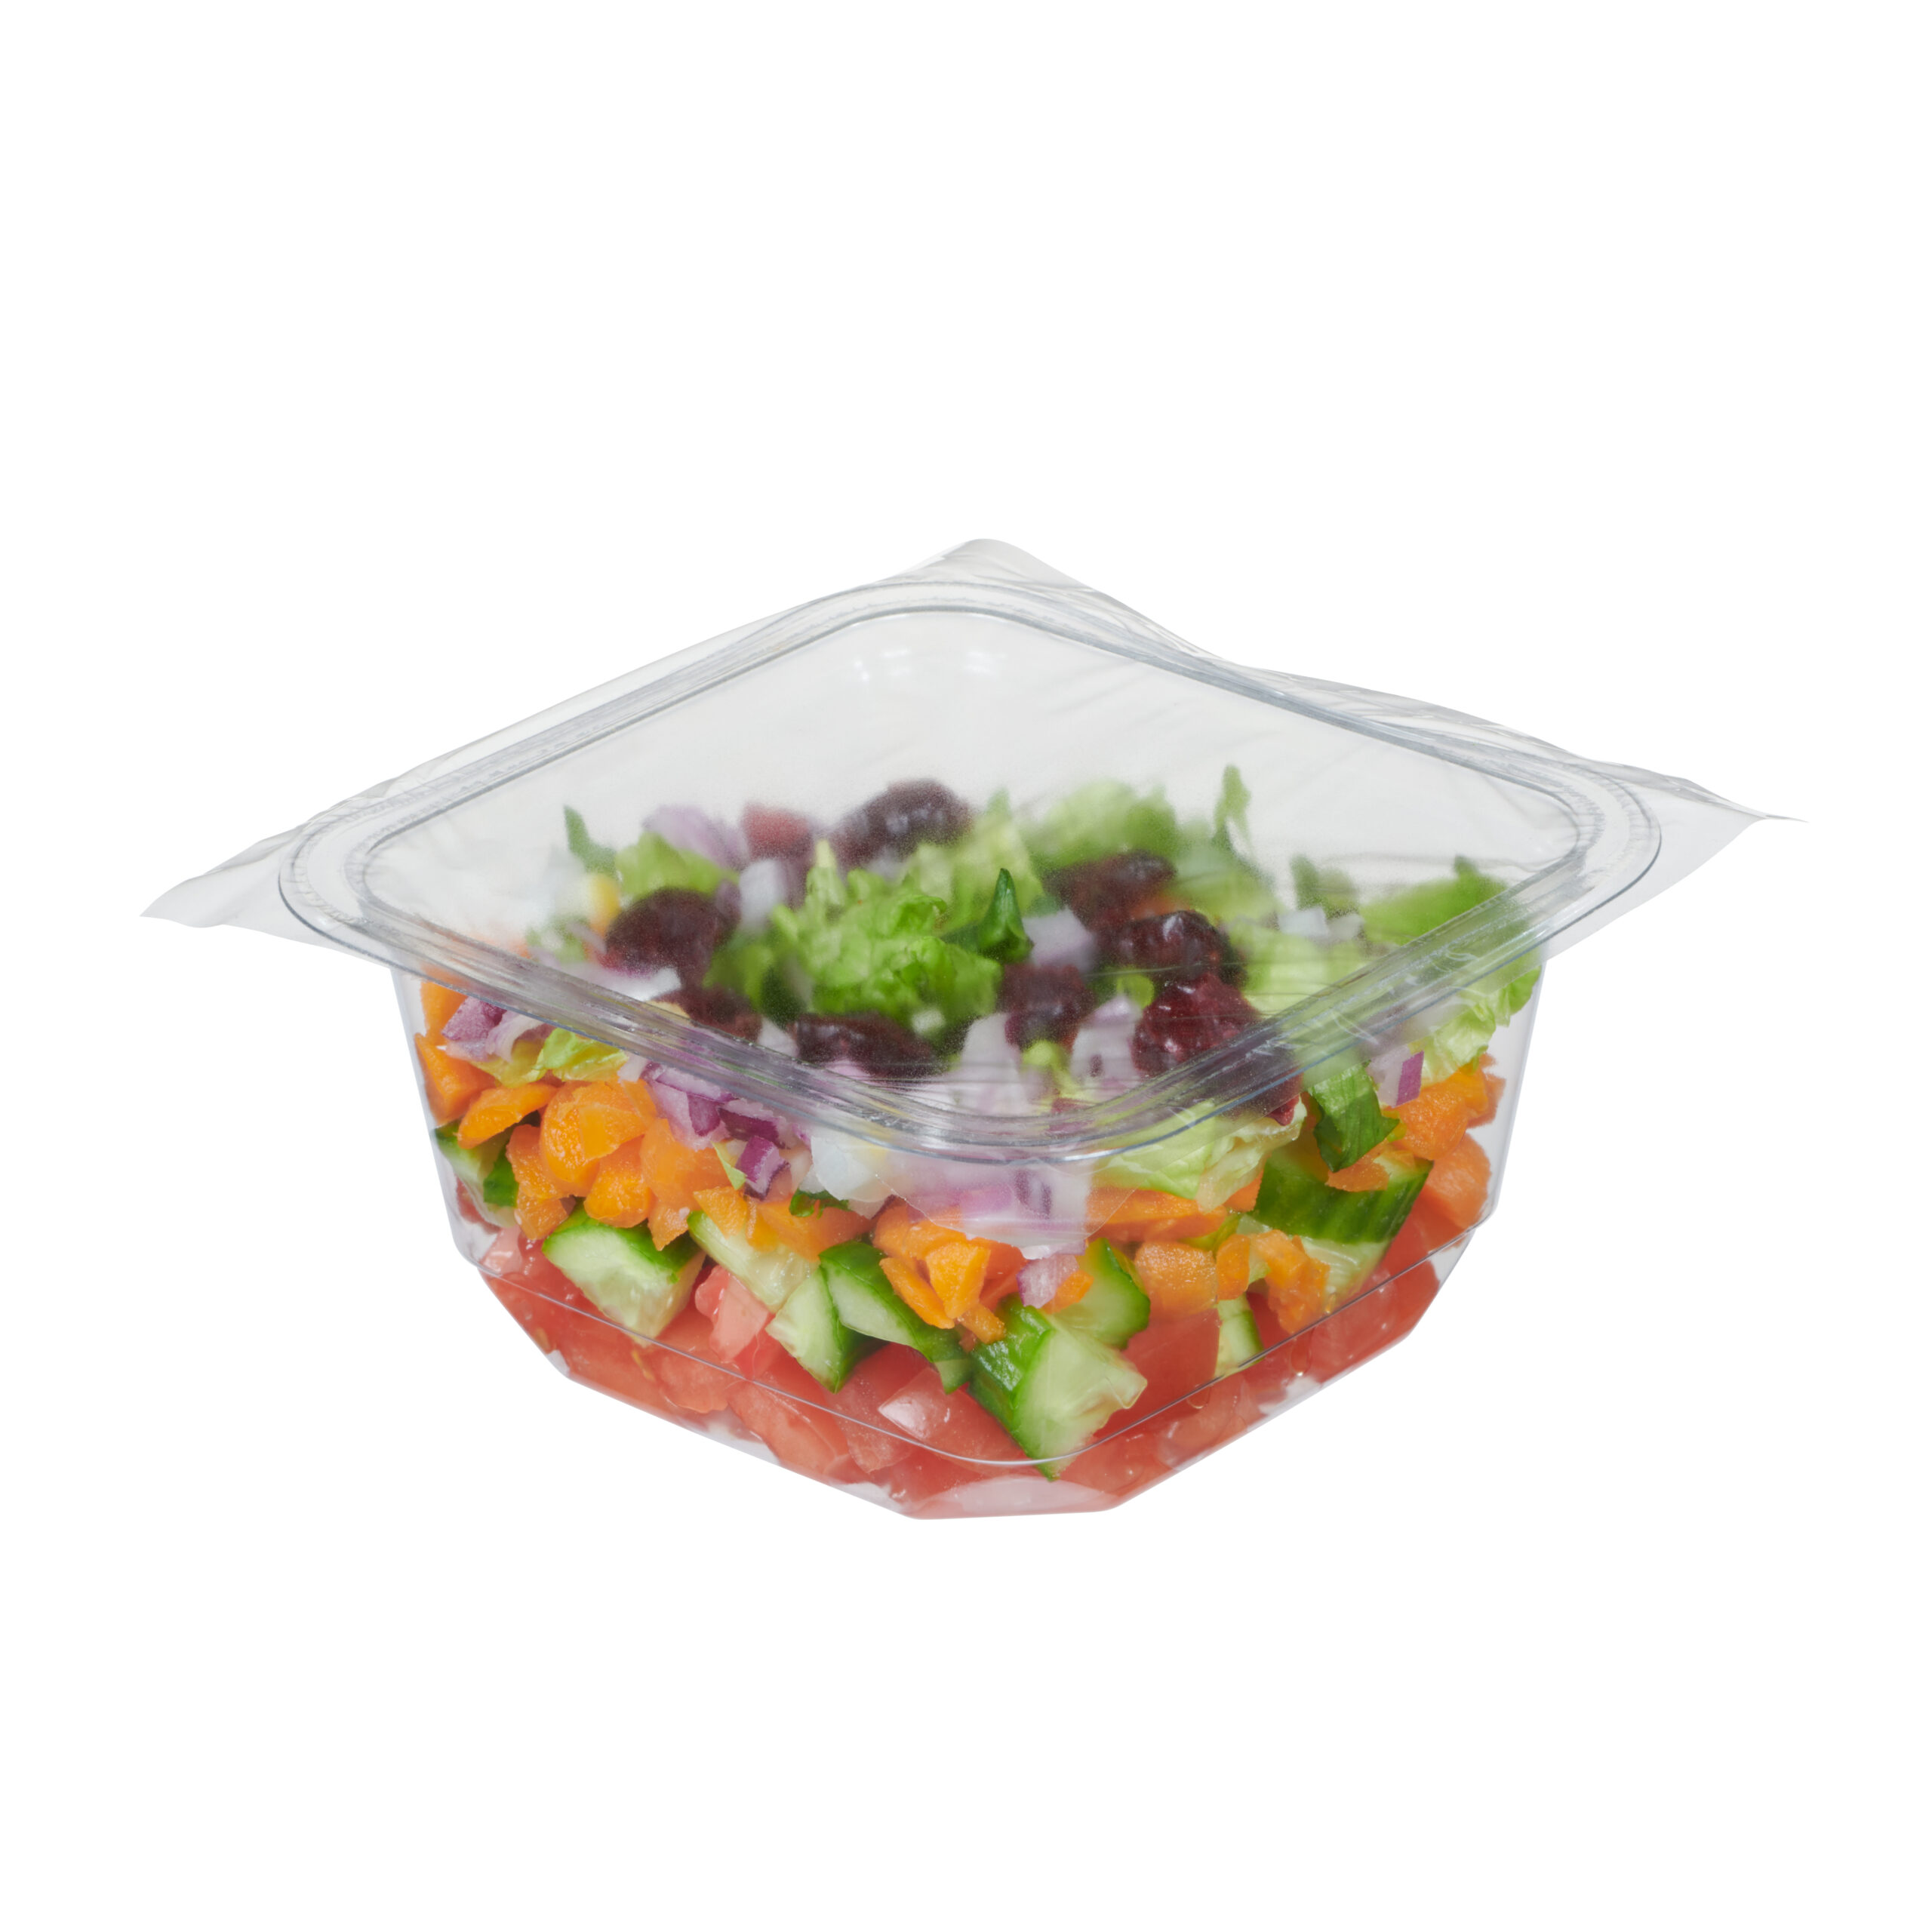 Clear plastic food tray with a layered salad, sealed with film